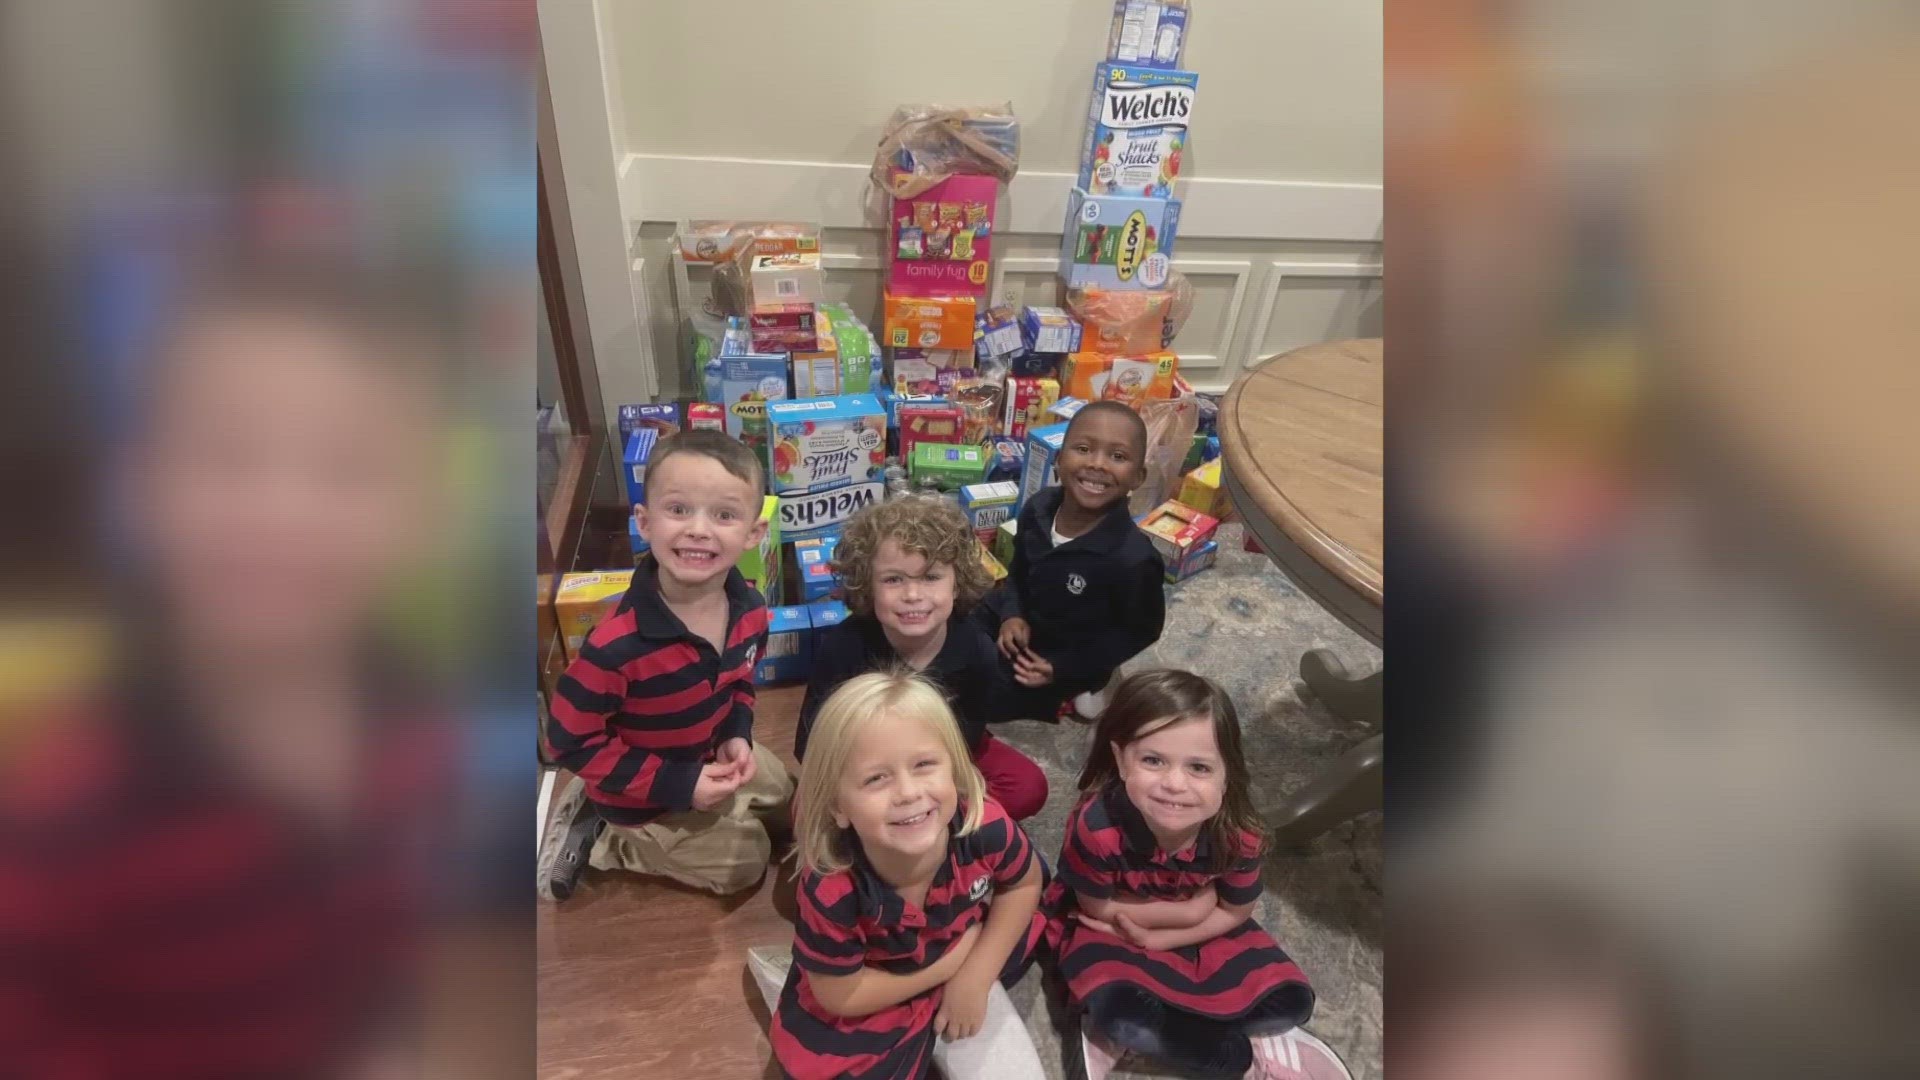 Louisville preschool donates 4,000 canned goods to ‘Snacks in Sack’